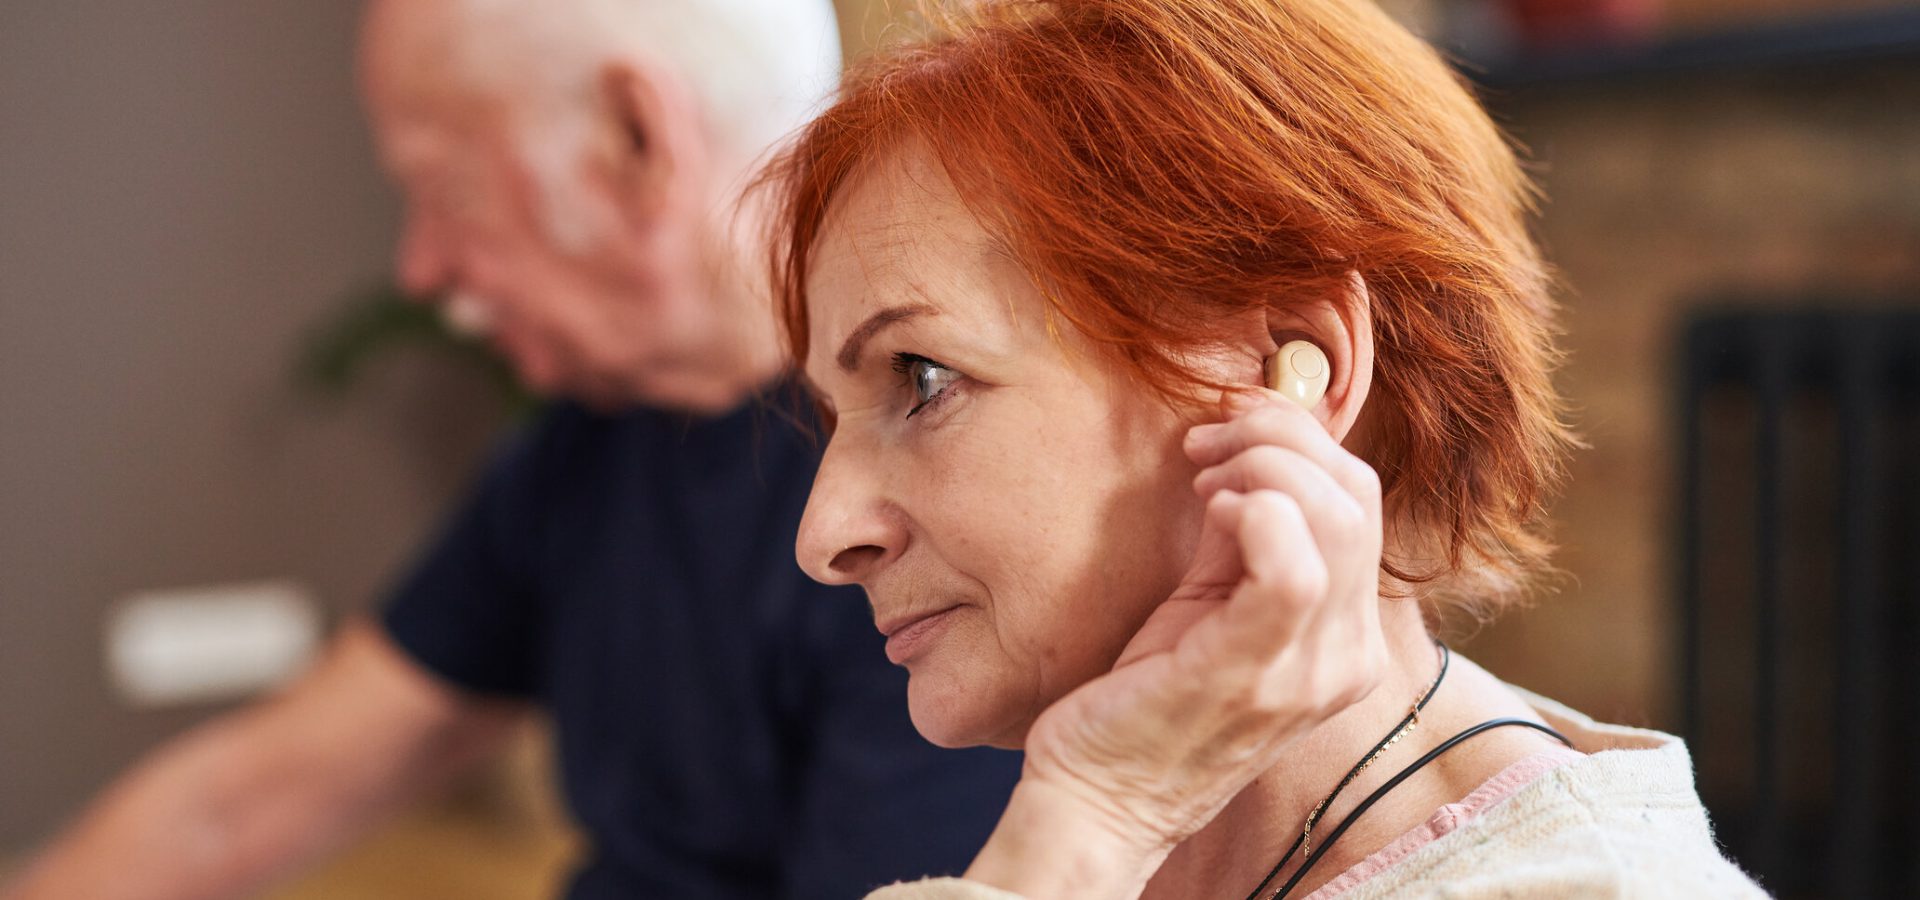 Side view of senior woman with short red hair using her hearing aid while sitting with other people in yoga class